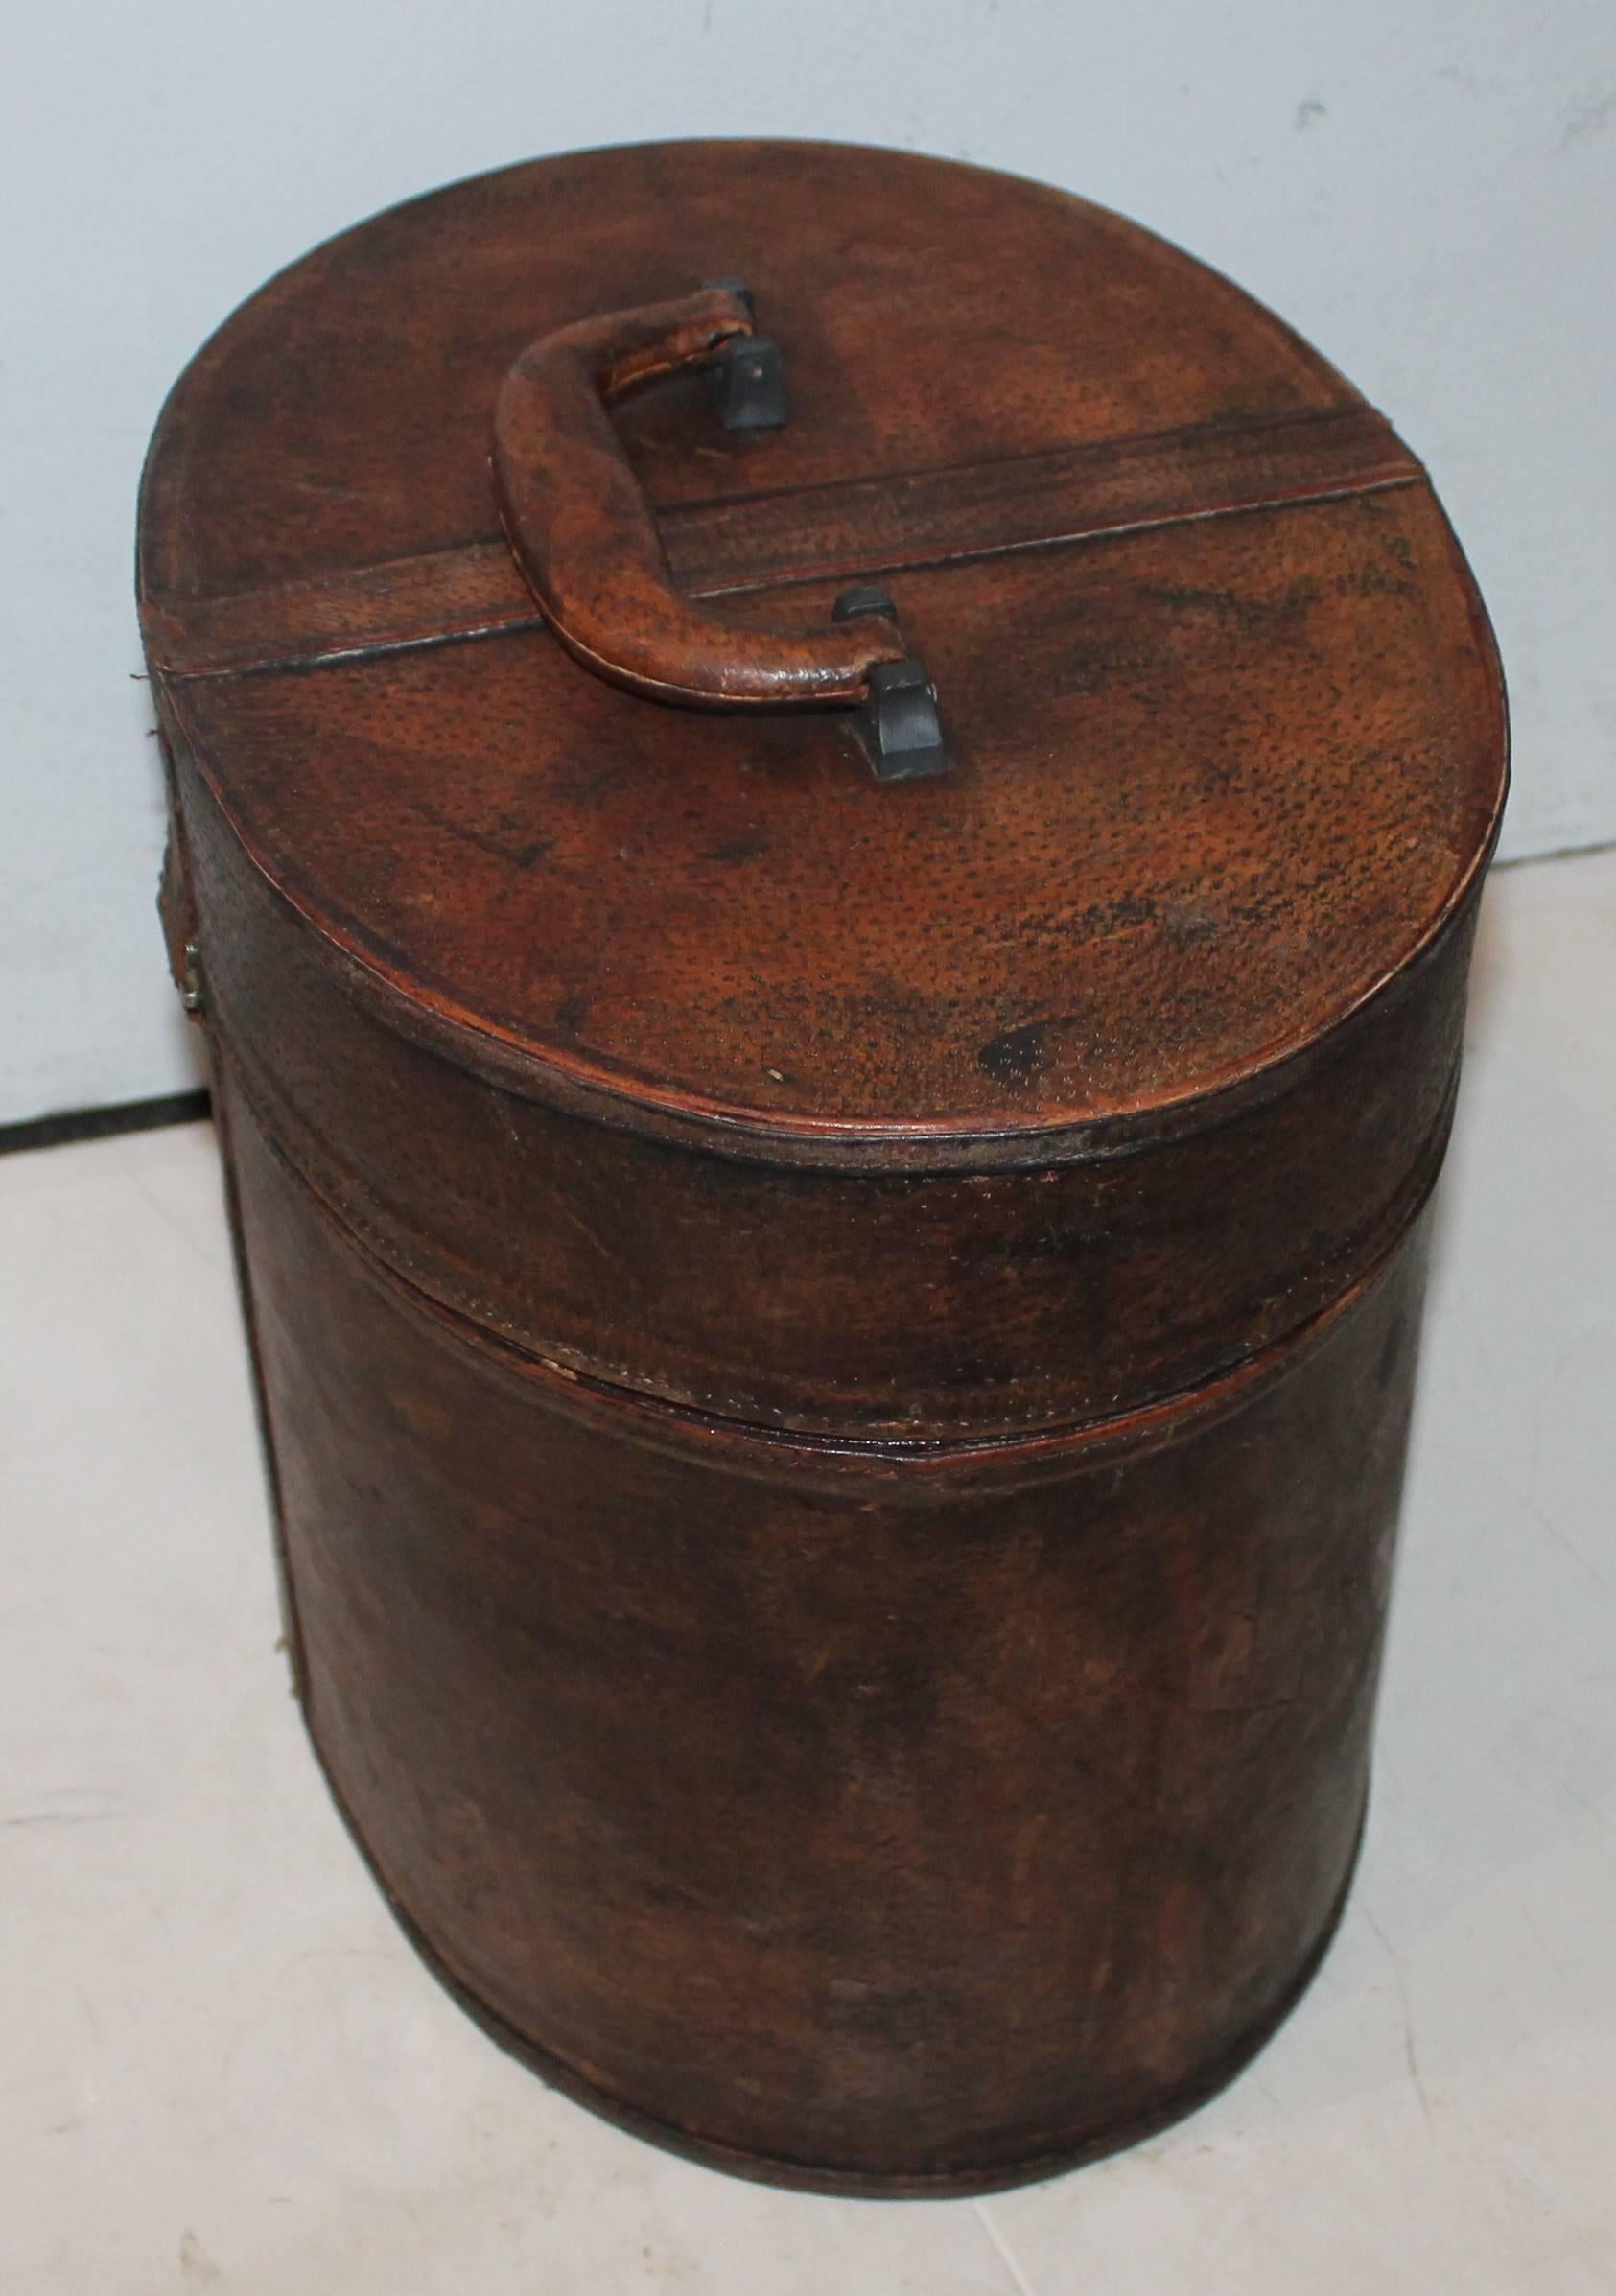 This large leather hat box is in great condition. Minor wear and scratches consistent with age and use.